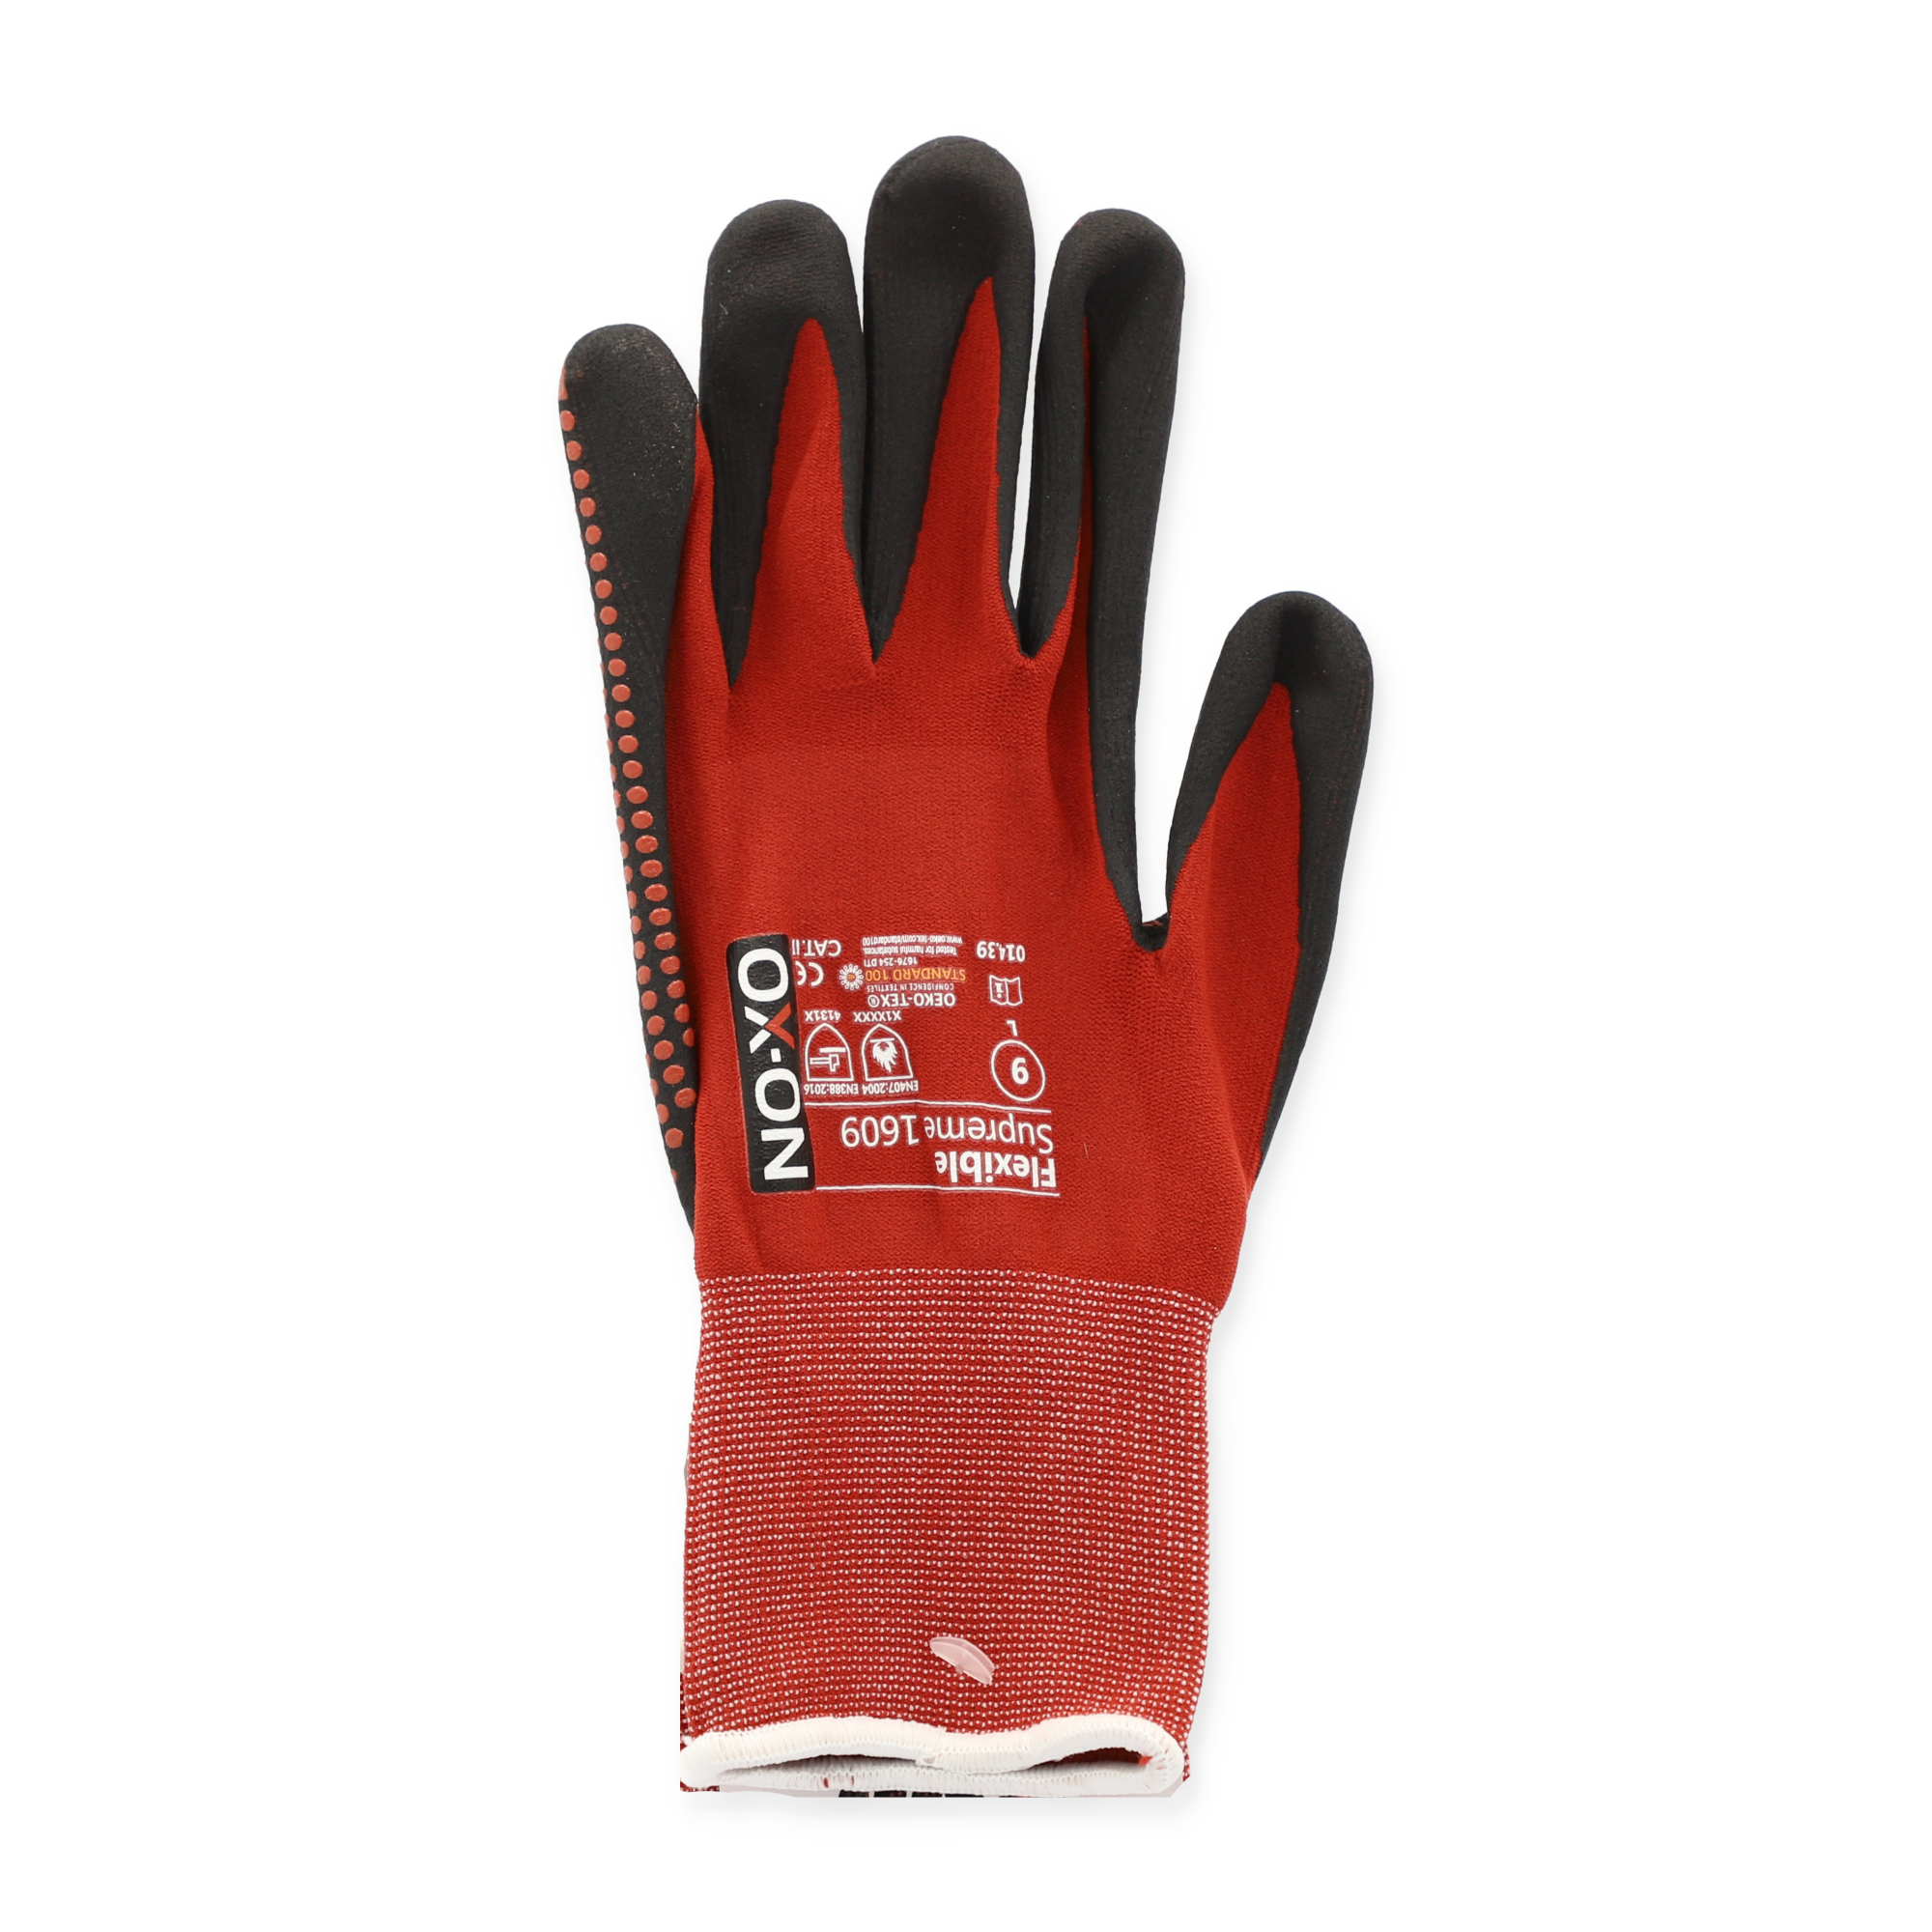 Handschuhe 'Flexible Supreme 1609' rot Gr. 10 + product picture